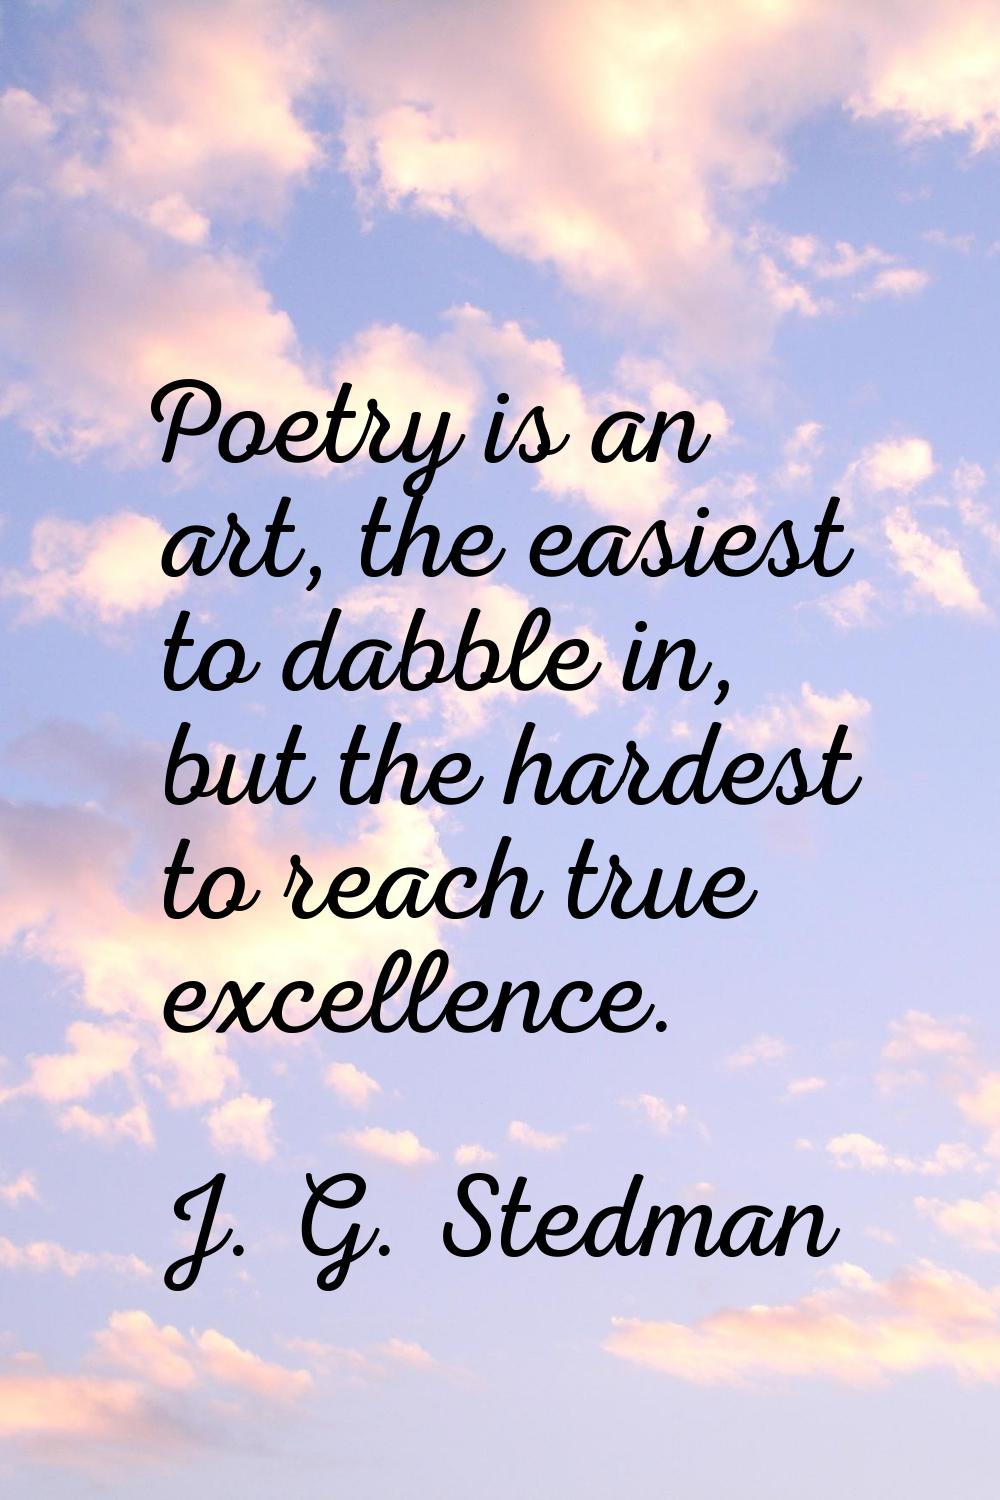 Poetry is an art, the easiest to dabble in, but the hardest to reach true excellence.